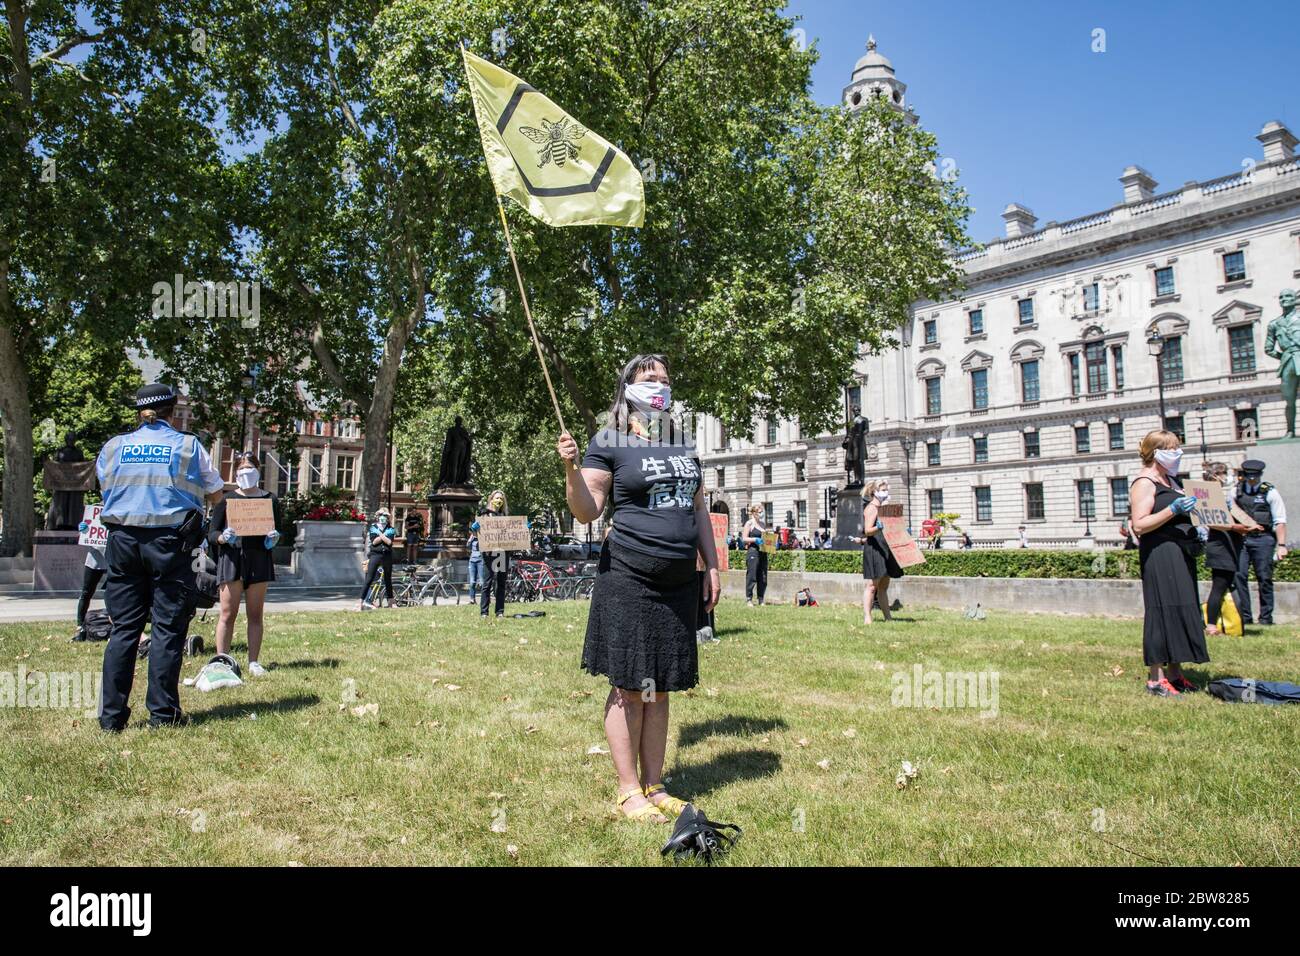 Parliament Square, London, UK. 30 May 2020. A few hundred environmental campaigners from Extinction Rebellion demonstrate peacefully in Parliament Square. Protesters hold placards, demand decisive action from the UK Government on the global environmental crisis. Activists are standing and maintain appropriate social distancing. Police questions individual campaigners prompting them to move on; some are body searched and arrests follow for breach of Covid-19 regulations. Stock Photo